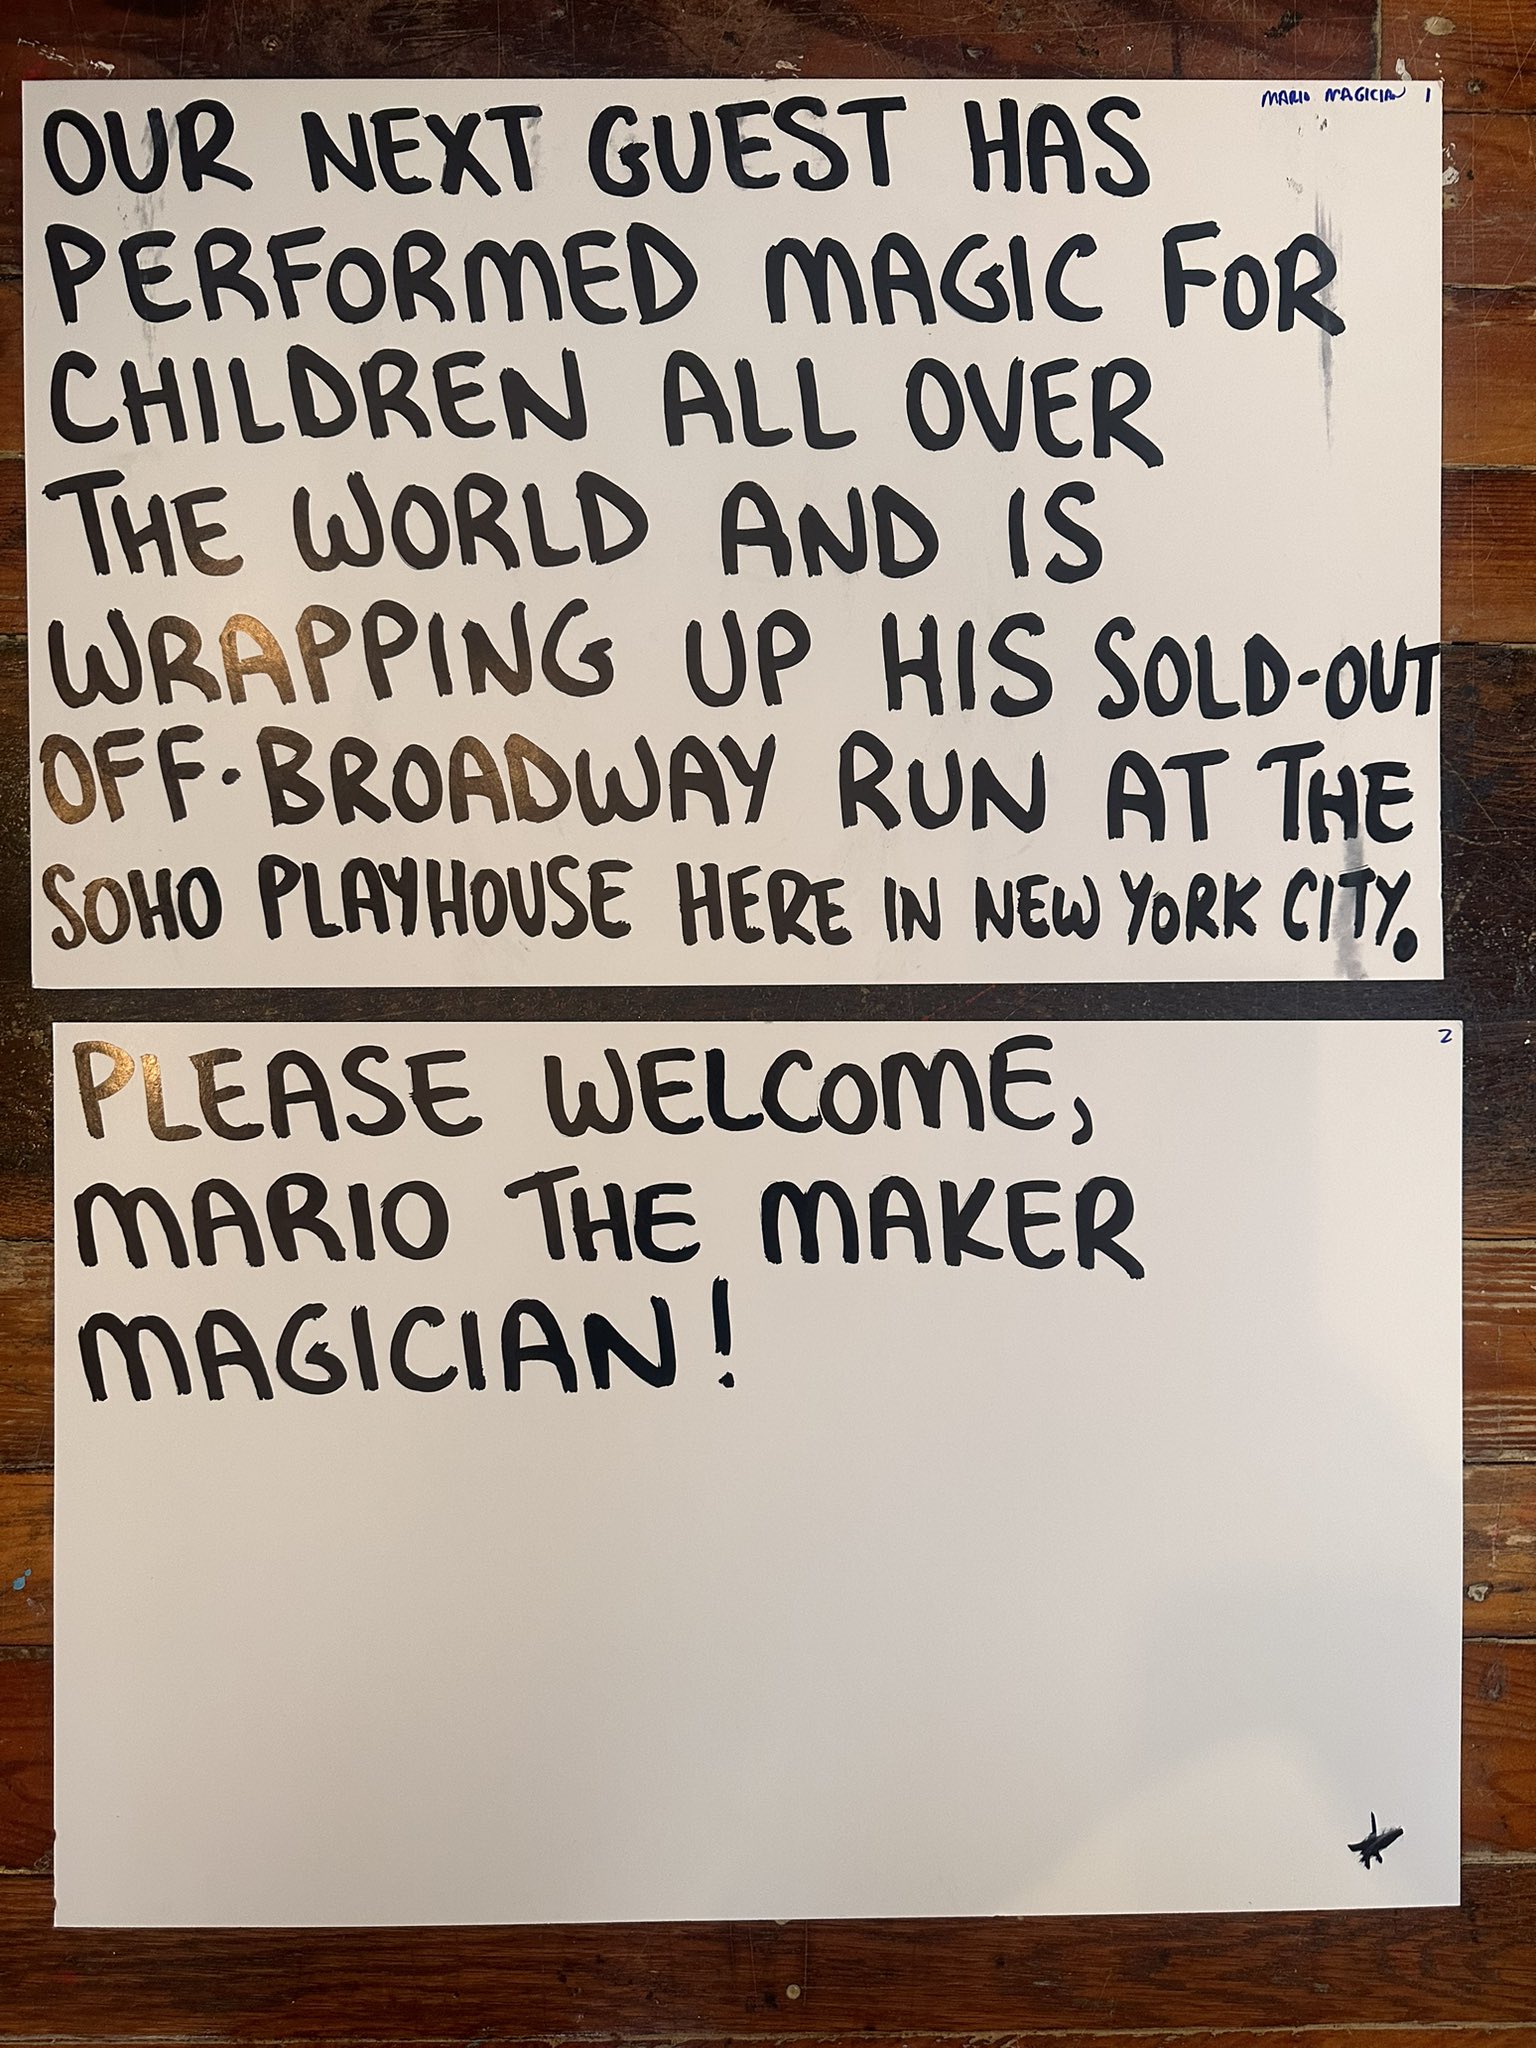 The Amazing MARIO THE MAKER MAGICIAN MARCHESE - October 20 - City